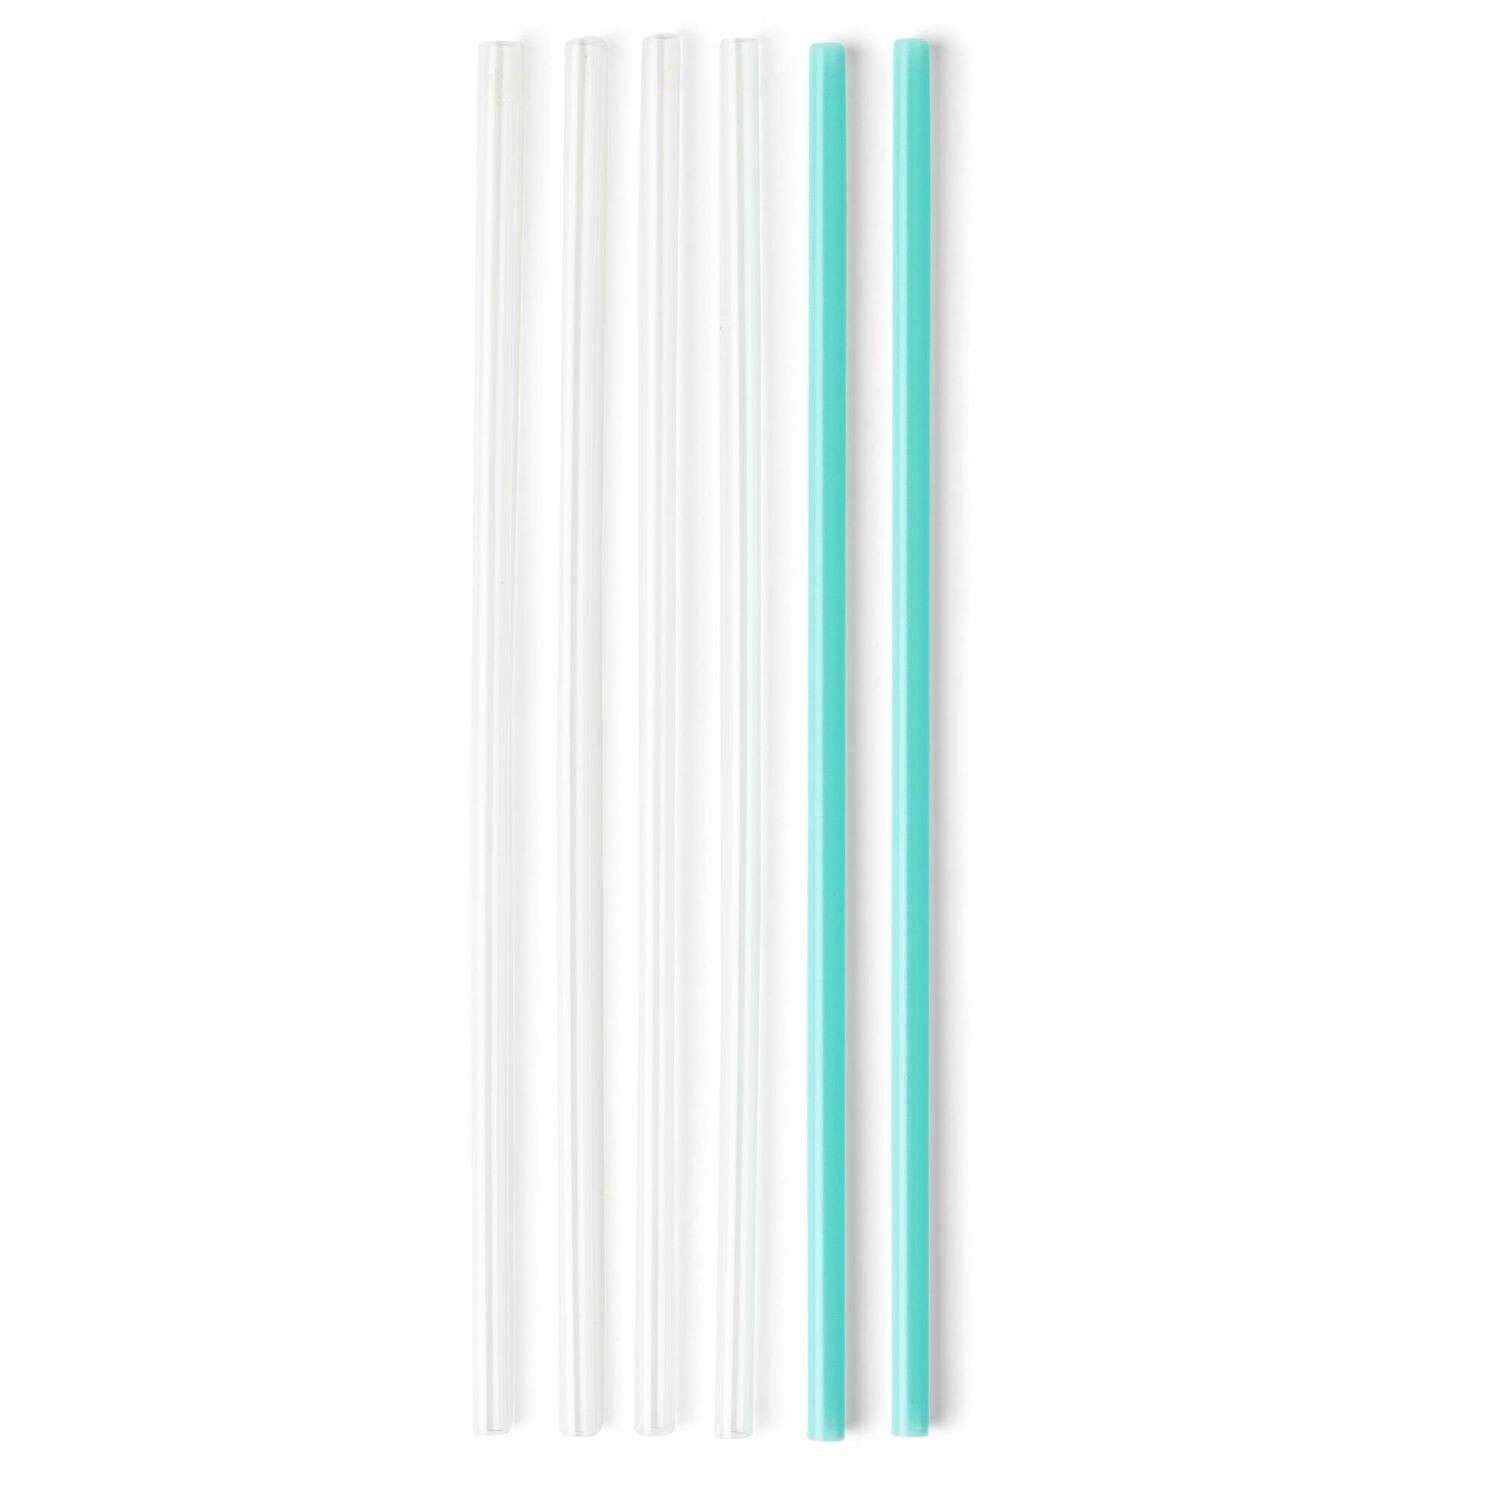 Straw - Clear And Aqua - 6 Straws & 1 Cleaning Brush